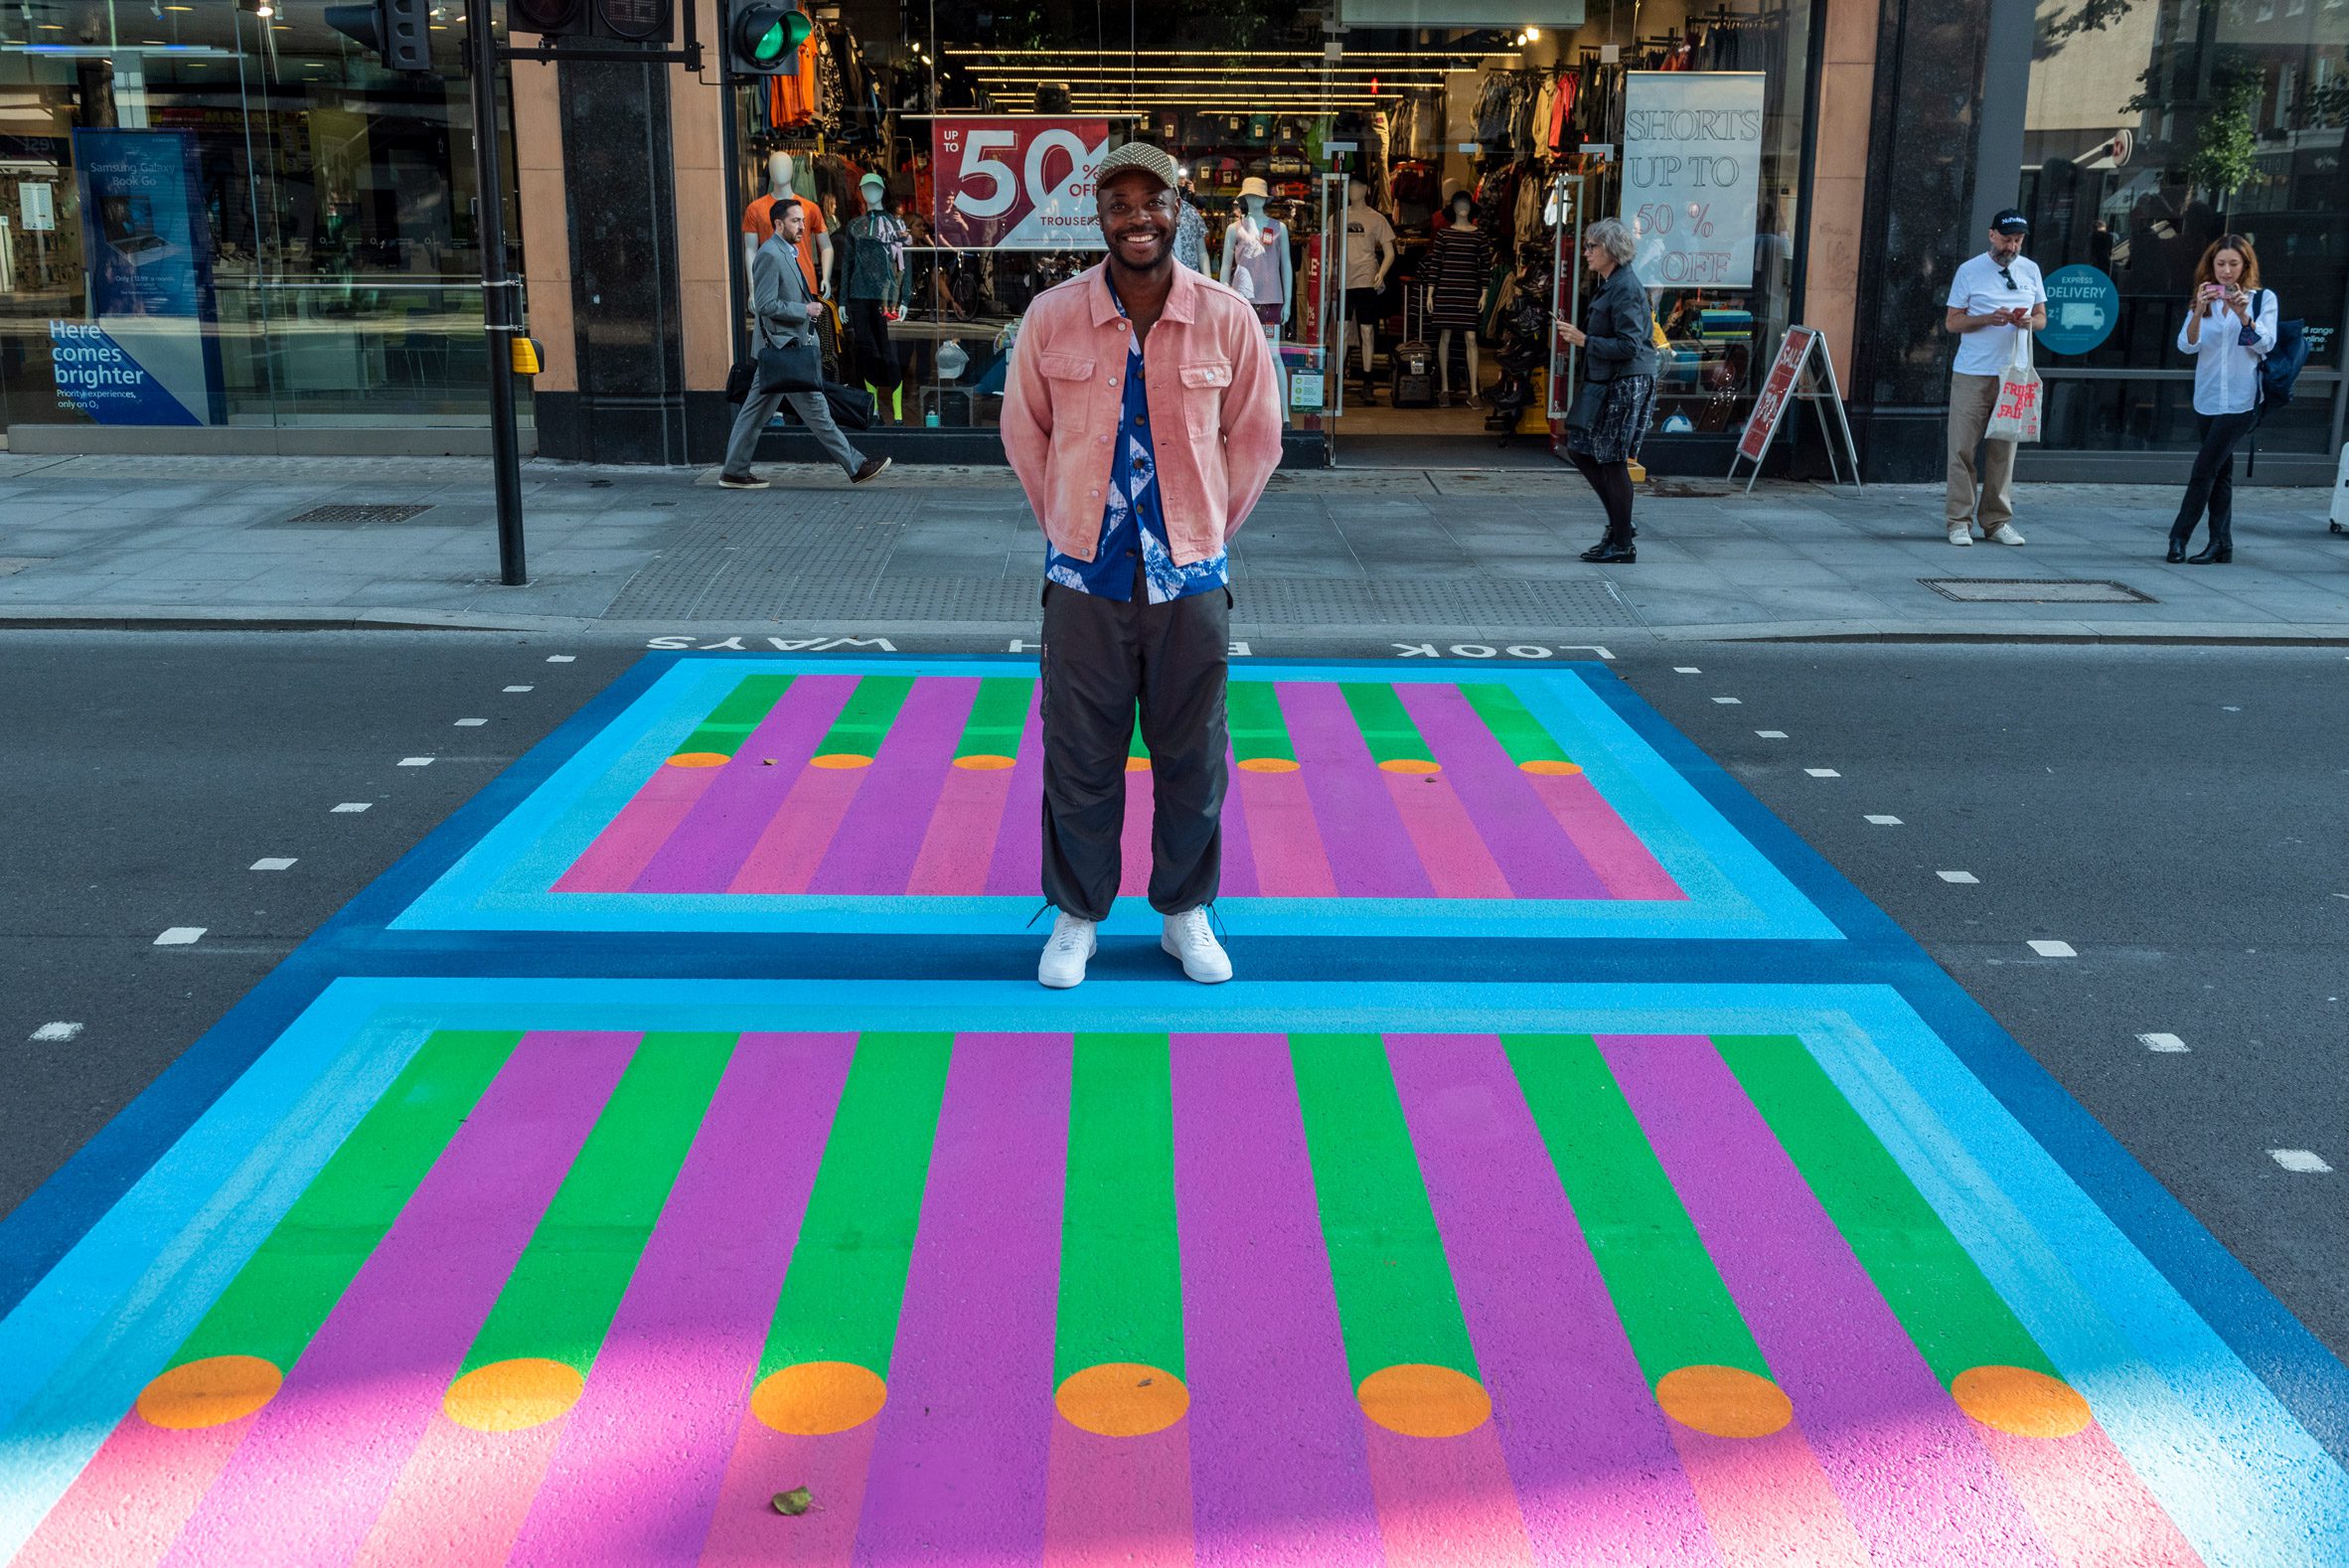 Yinka Ilori poses on his crossing for Bring London Together